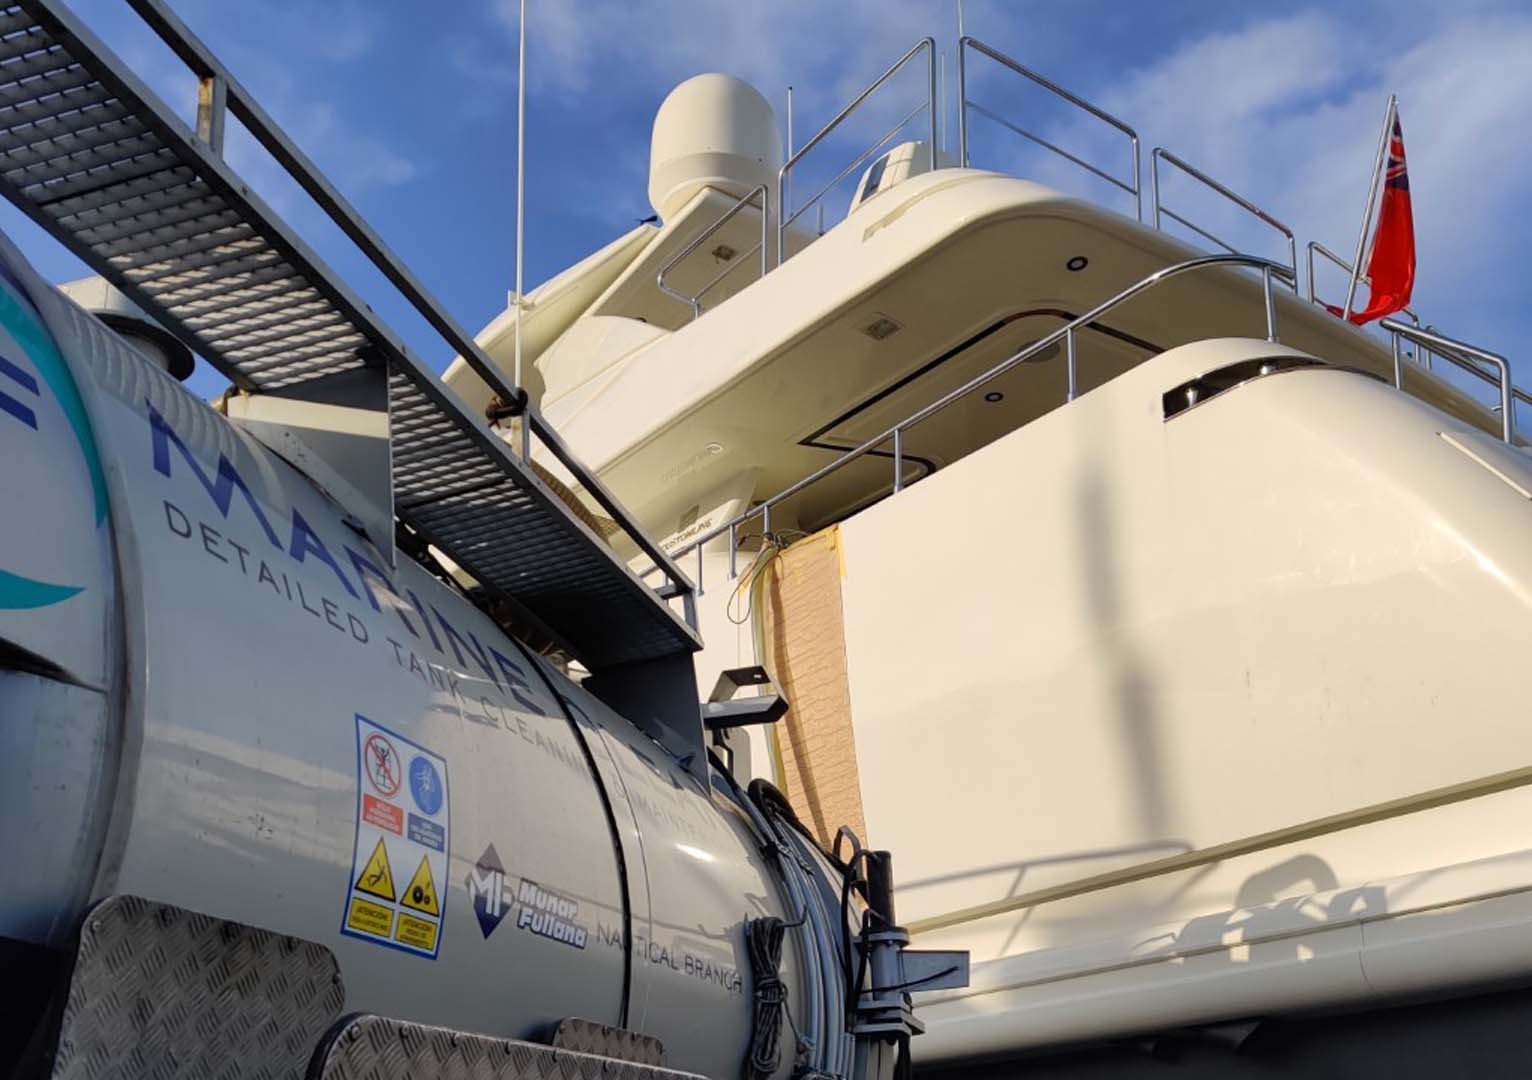 Tank emptying service for yachts in Mallorca